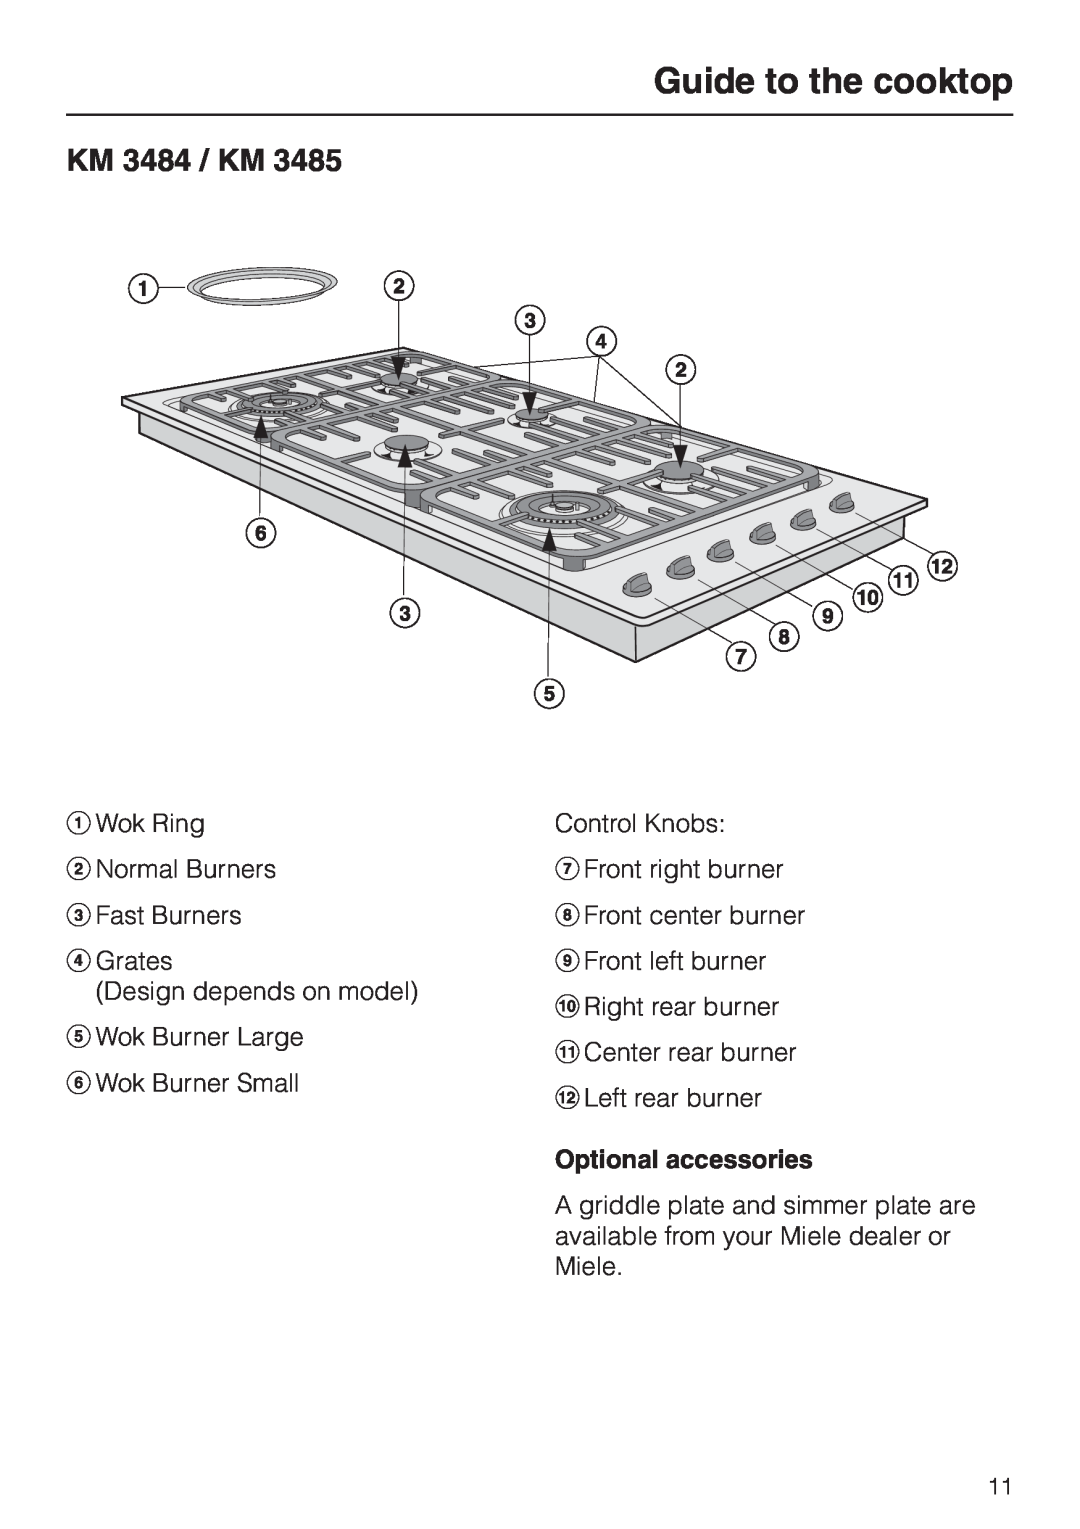 Miele KM 3474, KM 3485 installation instructions KM 3484 / KM, Optional accessories, Guide to the cooktop 